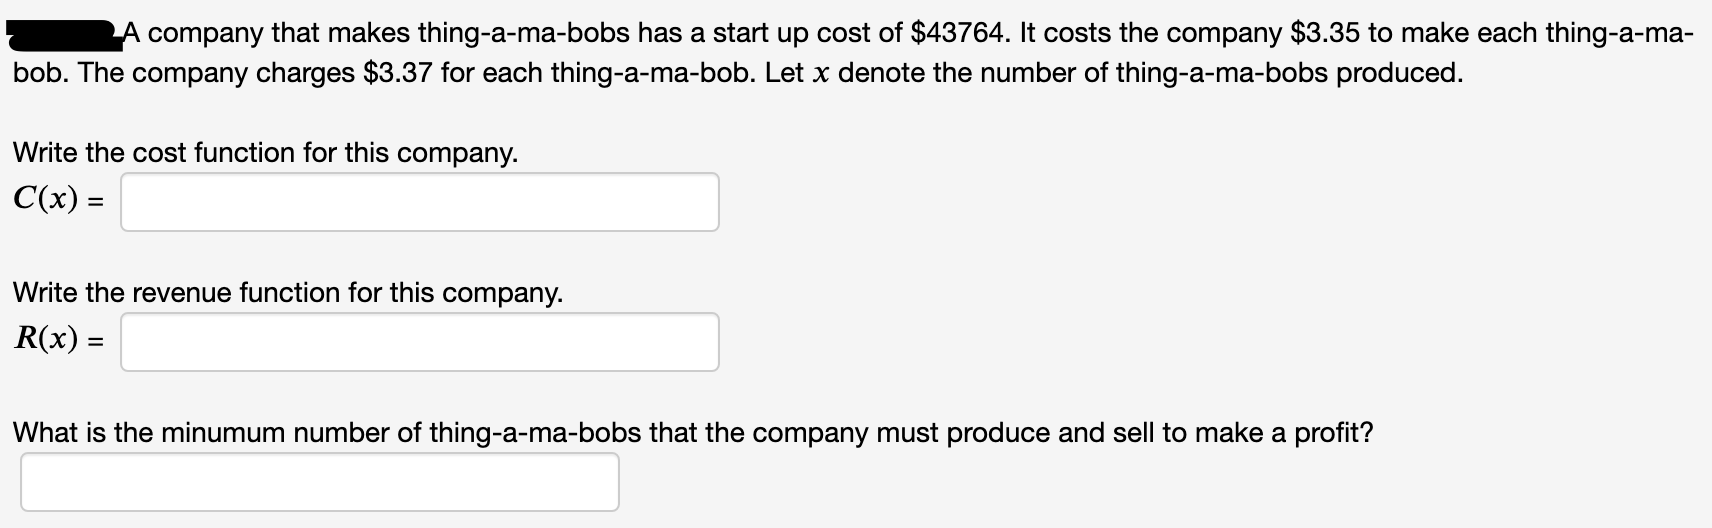 A company that makes thing-a-ma-bobs has a start up cost of $43764. It costs the company $3.35 to make each thing-a-ma-
bob. The company charges $3.37 for each thing-a-ma-bob. Let x denote the number of thing-a-ma-bobs produced.
Write the cost function for this company.
C(x) =
Write the revenue function for this company.
R(x) =
What is the minumum number of thing-a-ma-bobs that the company must produce and sell to make a profit?
